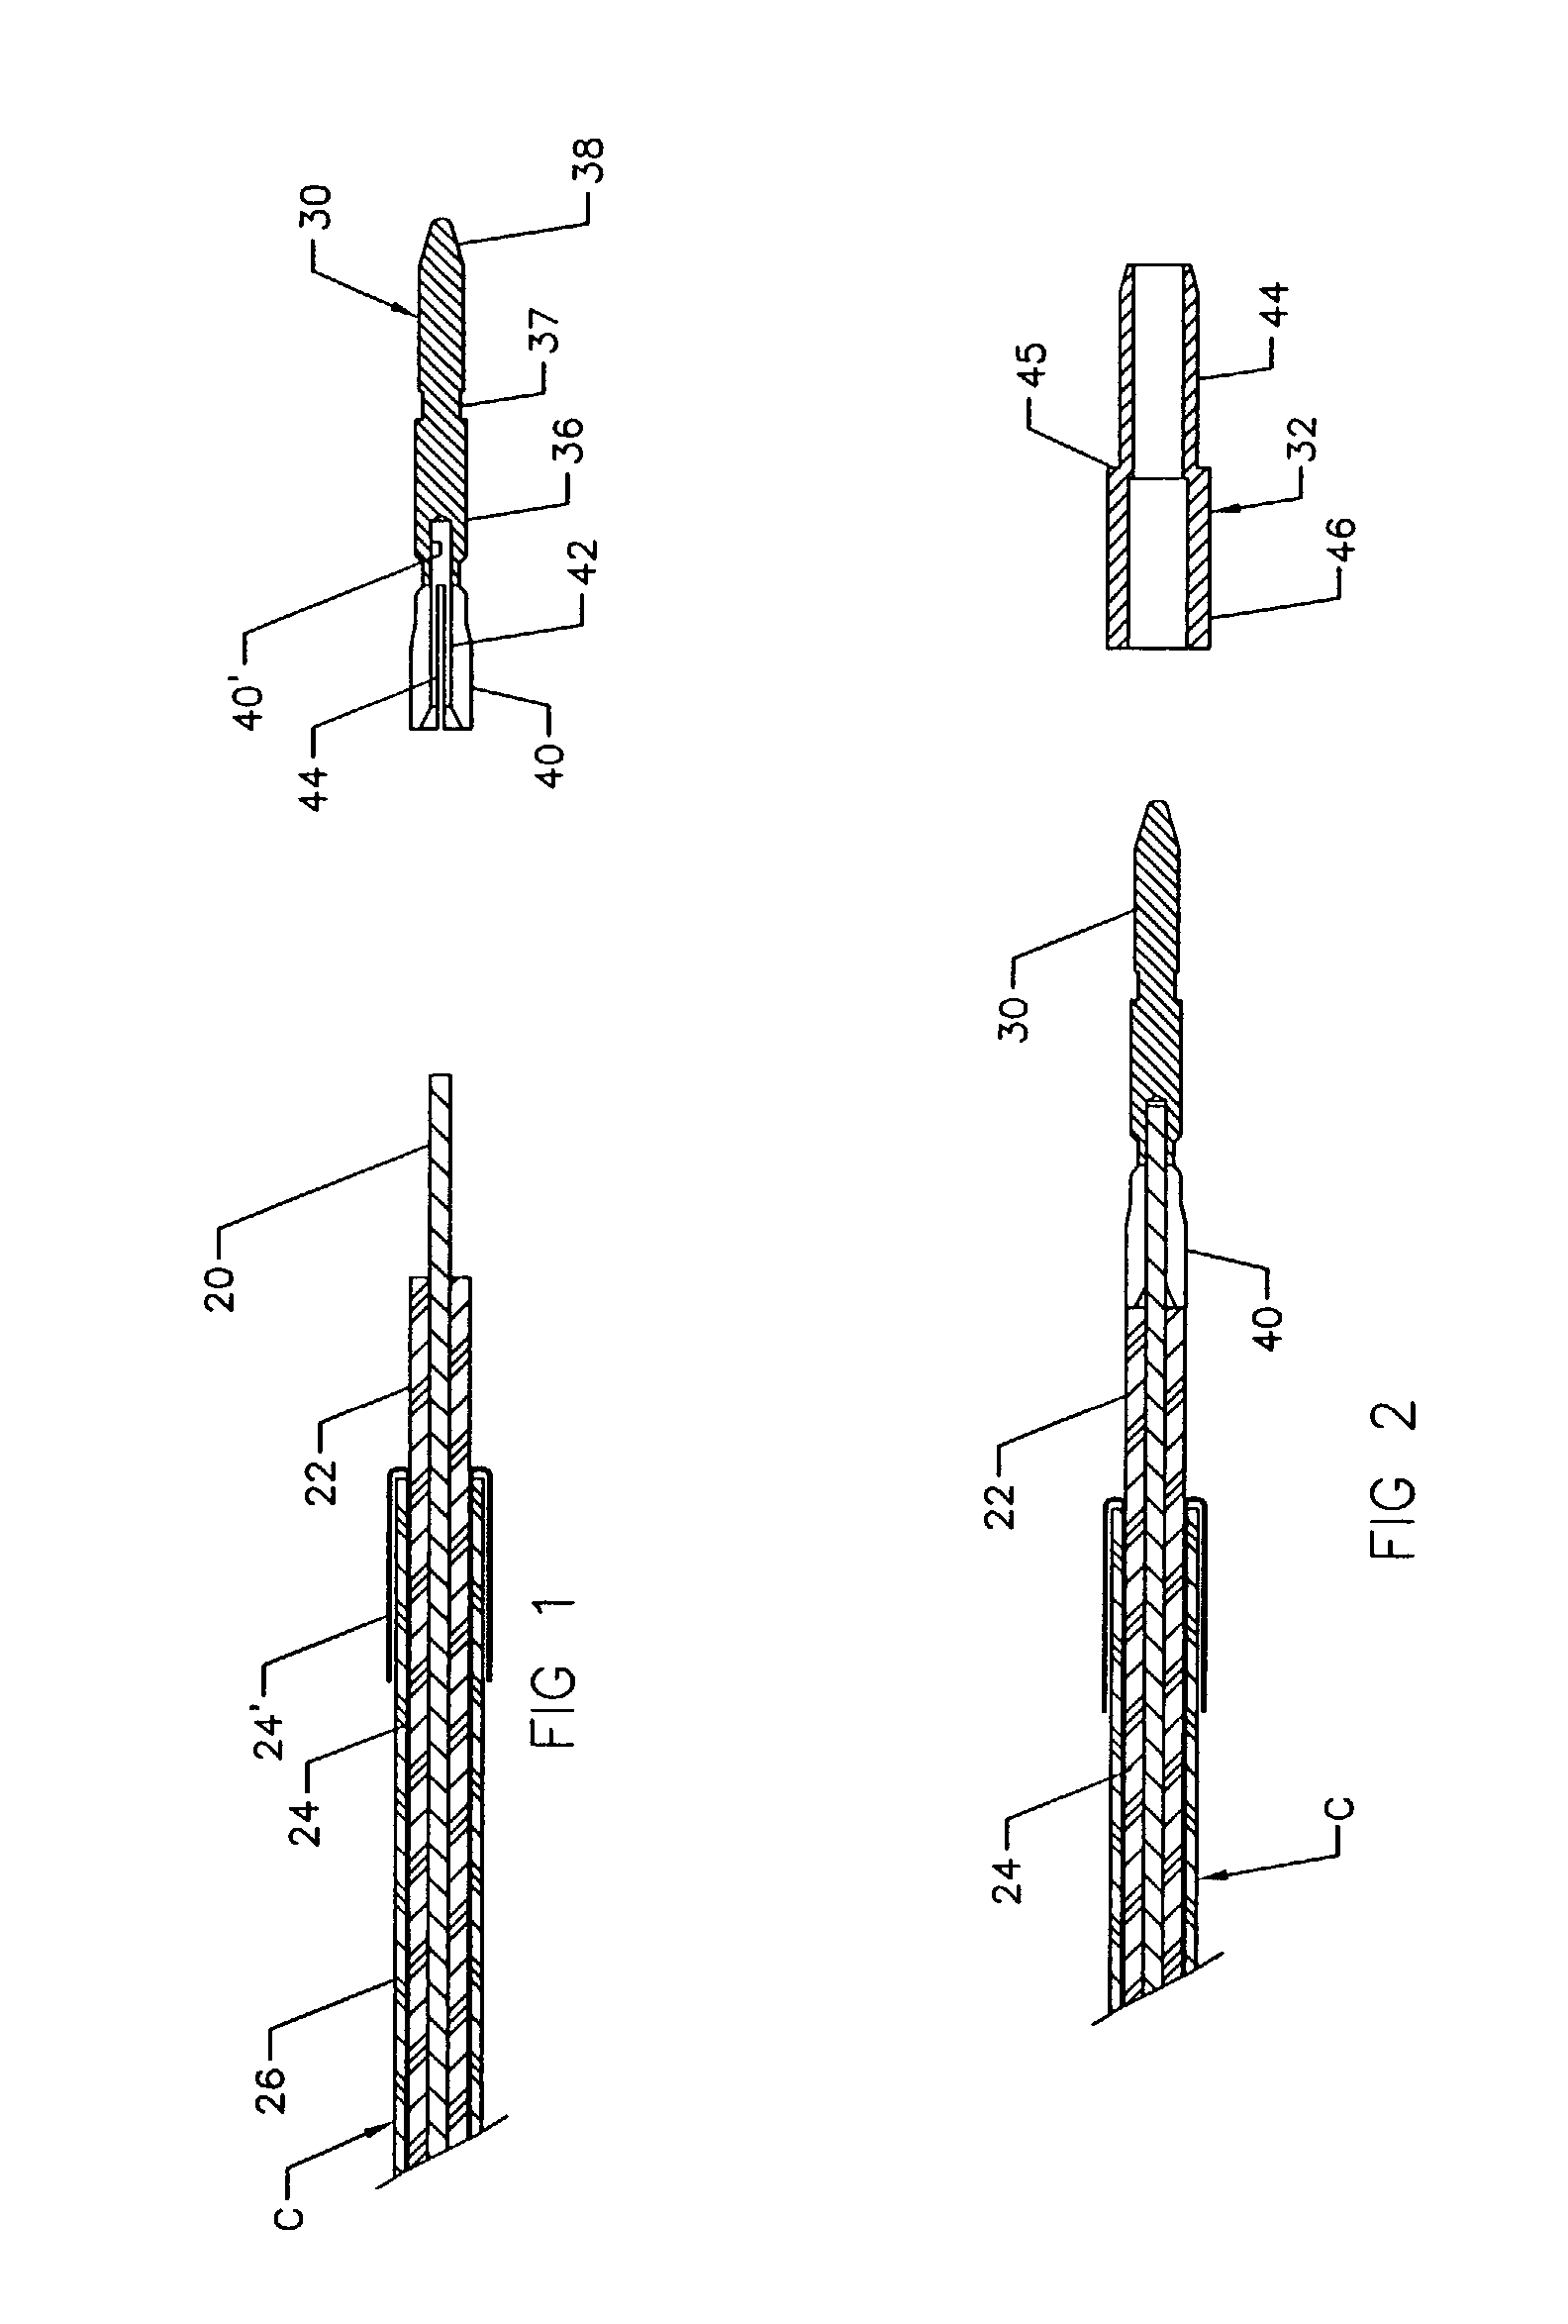 Mini-coax cable connector and method of installation